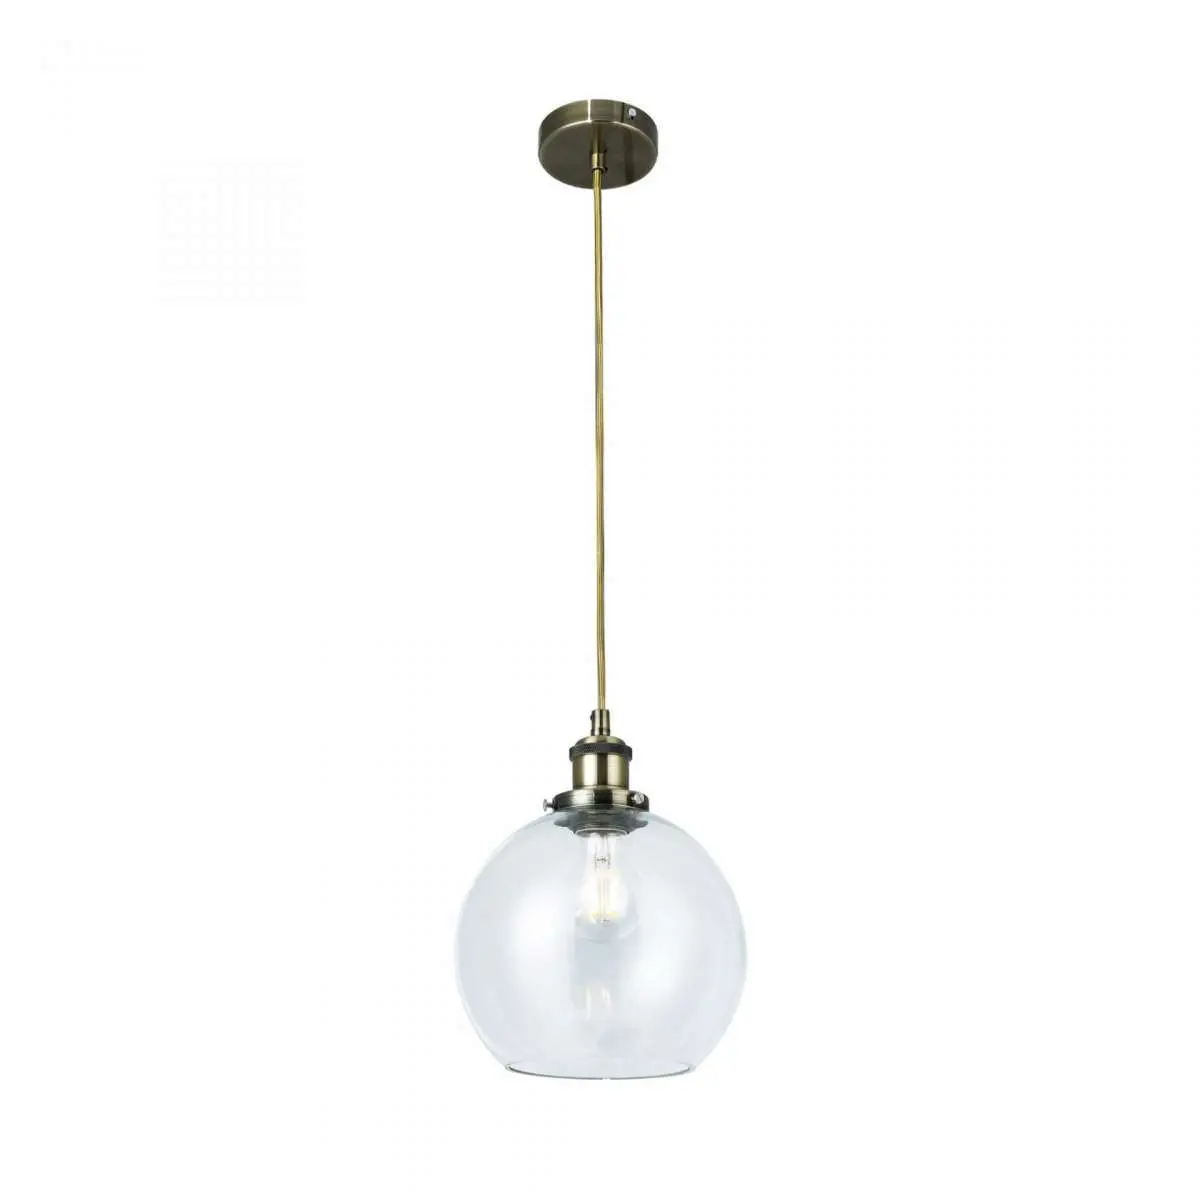 Lewis Small Glass Ball Pendant Antique Brass